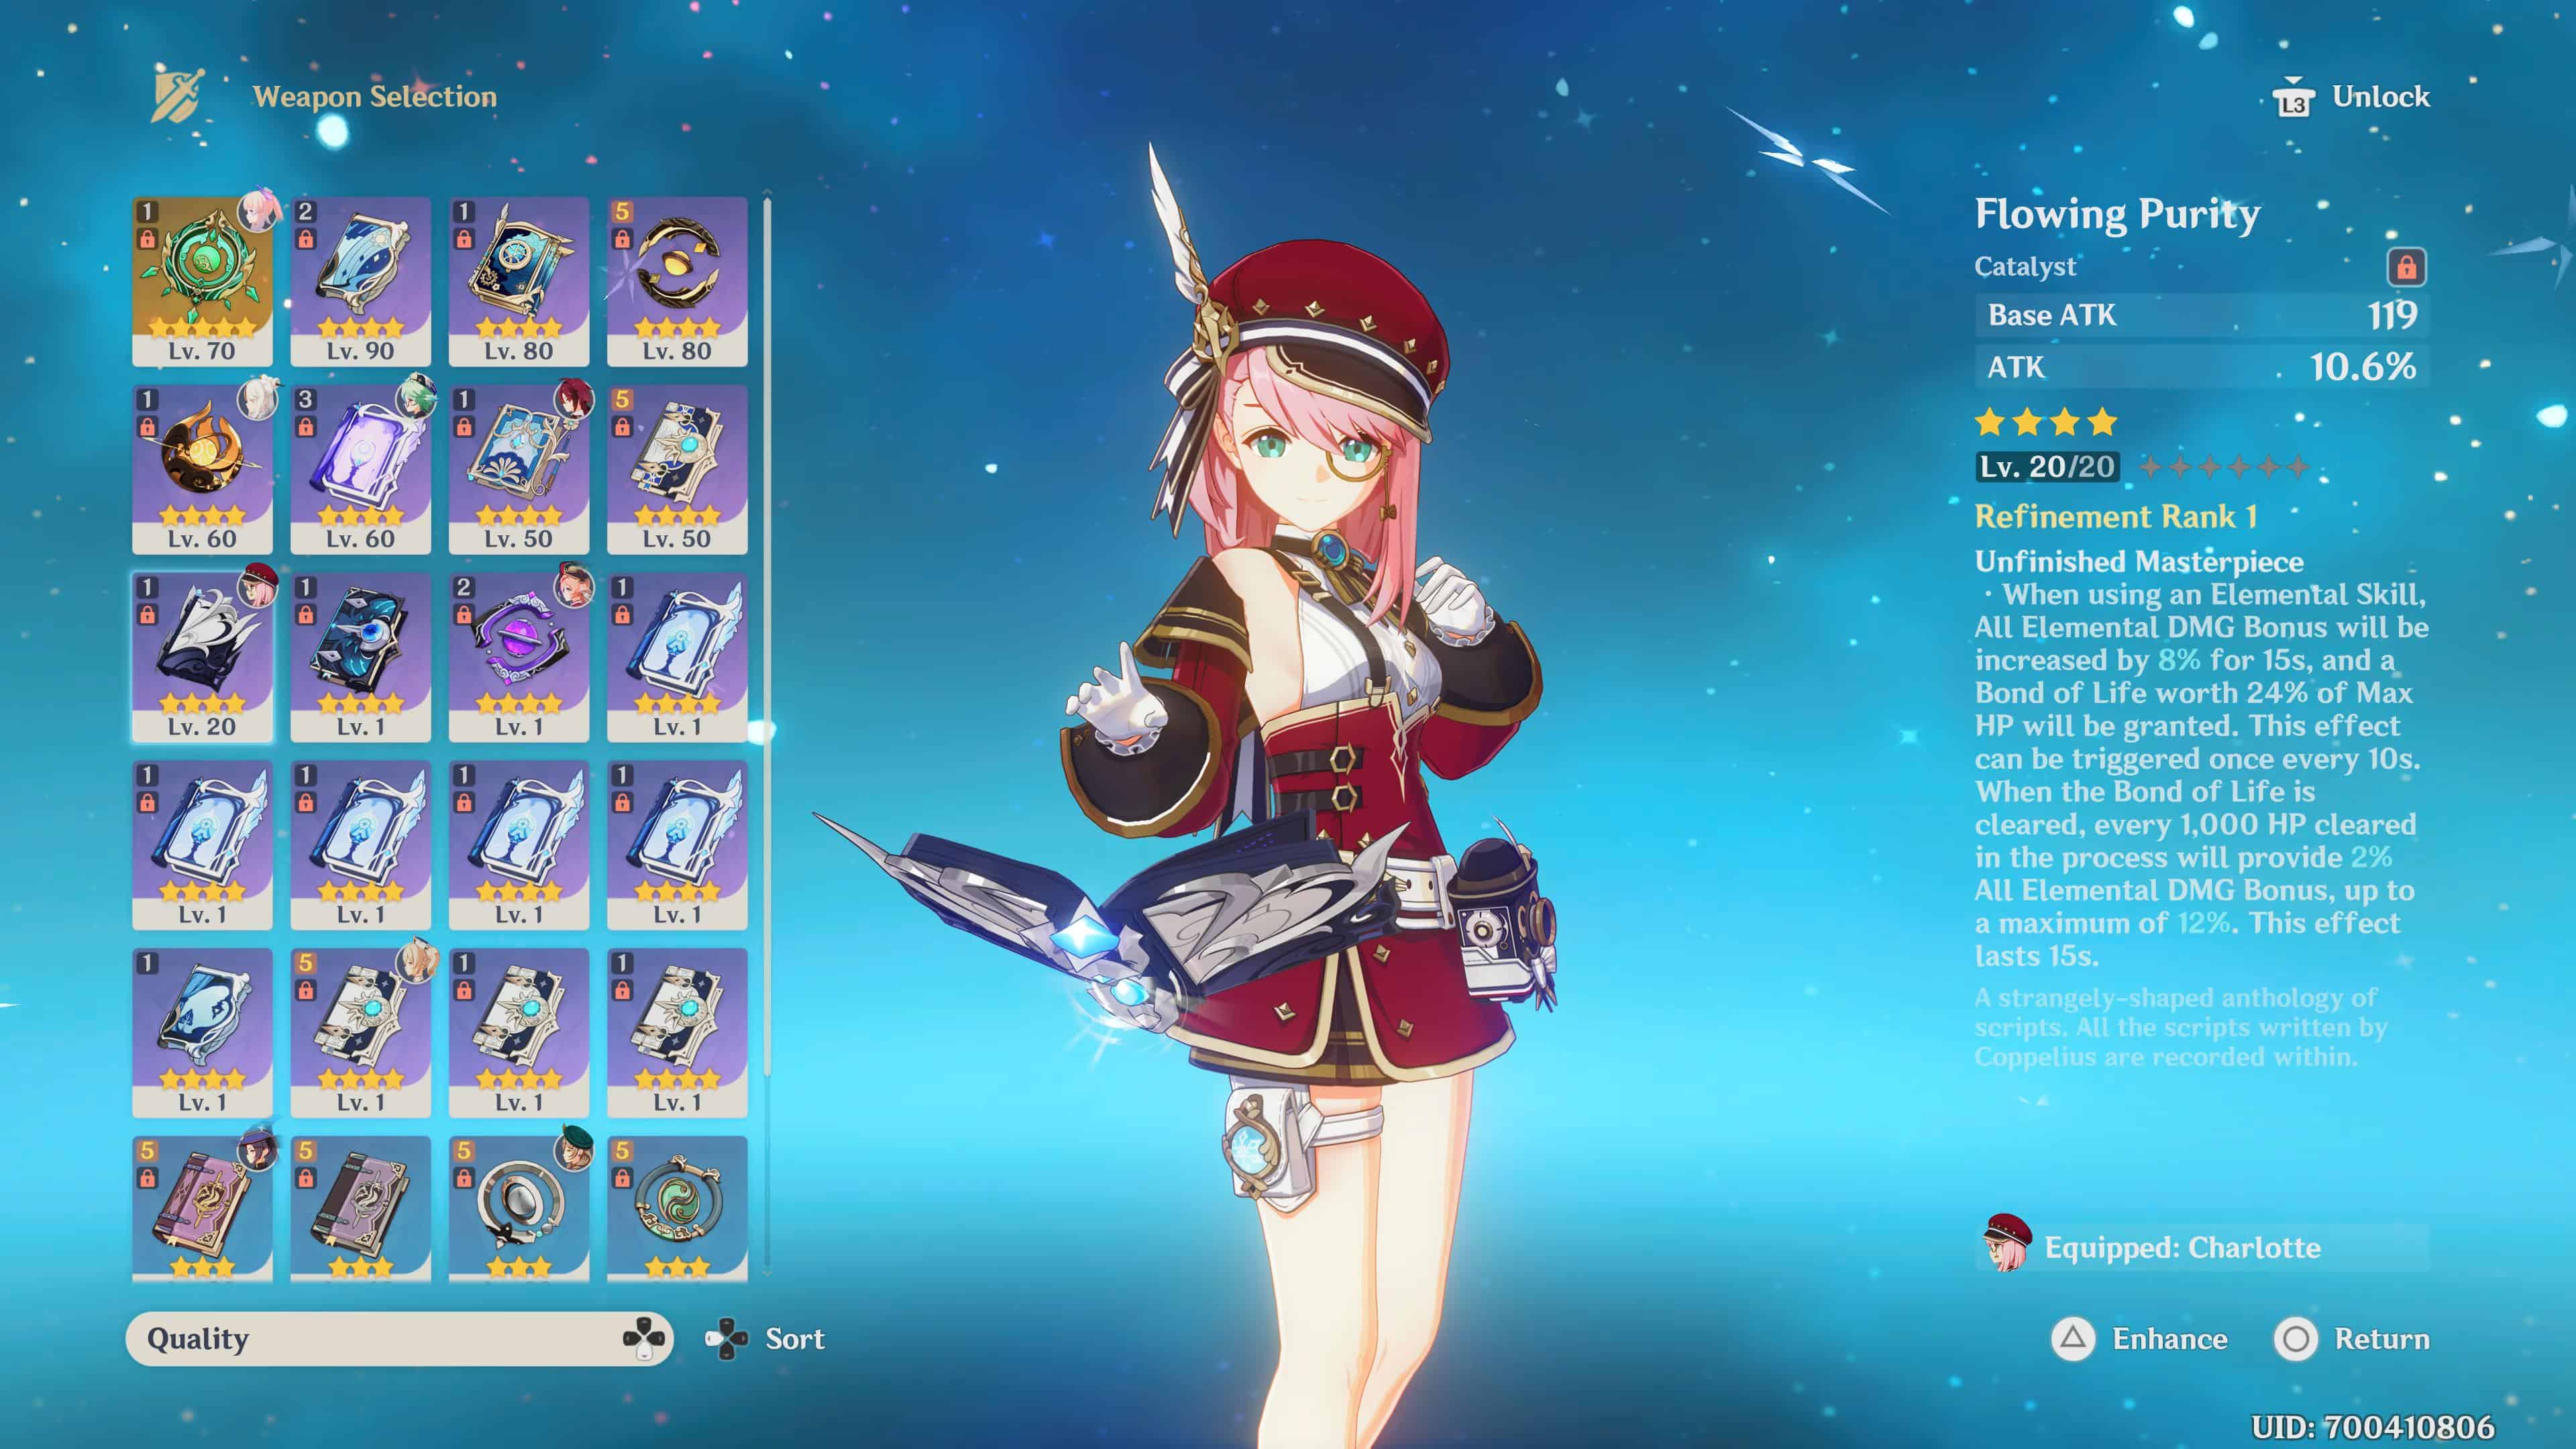 Genshin Impact: Image shows Charlotte holding a weapon in the menu